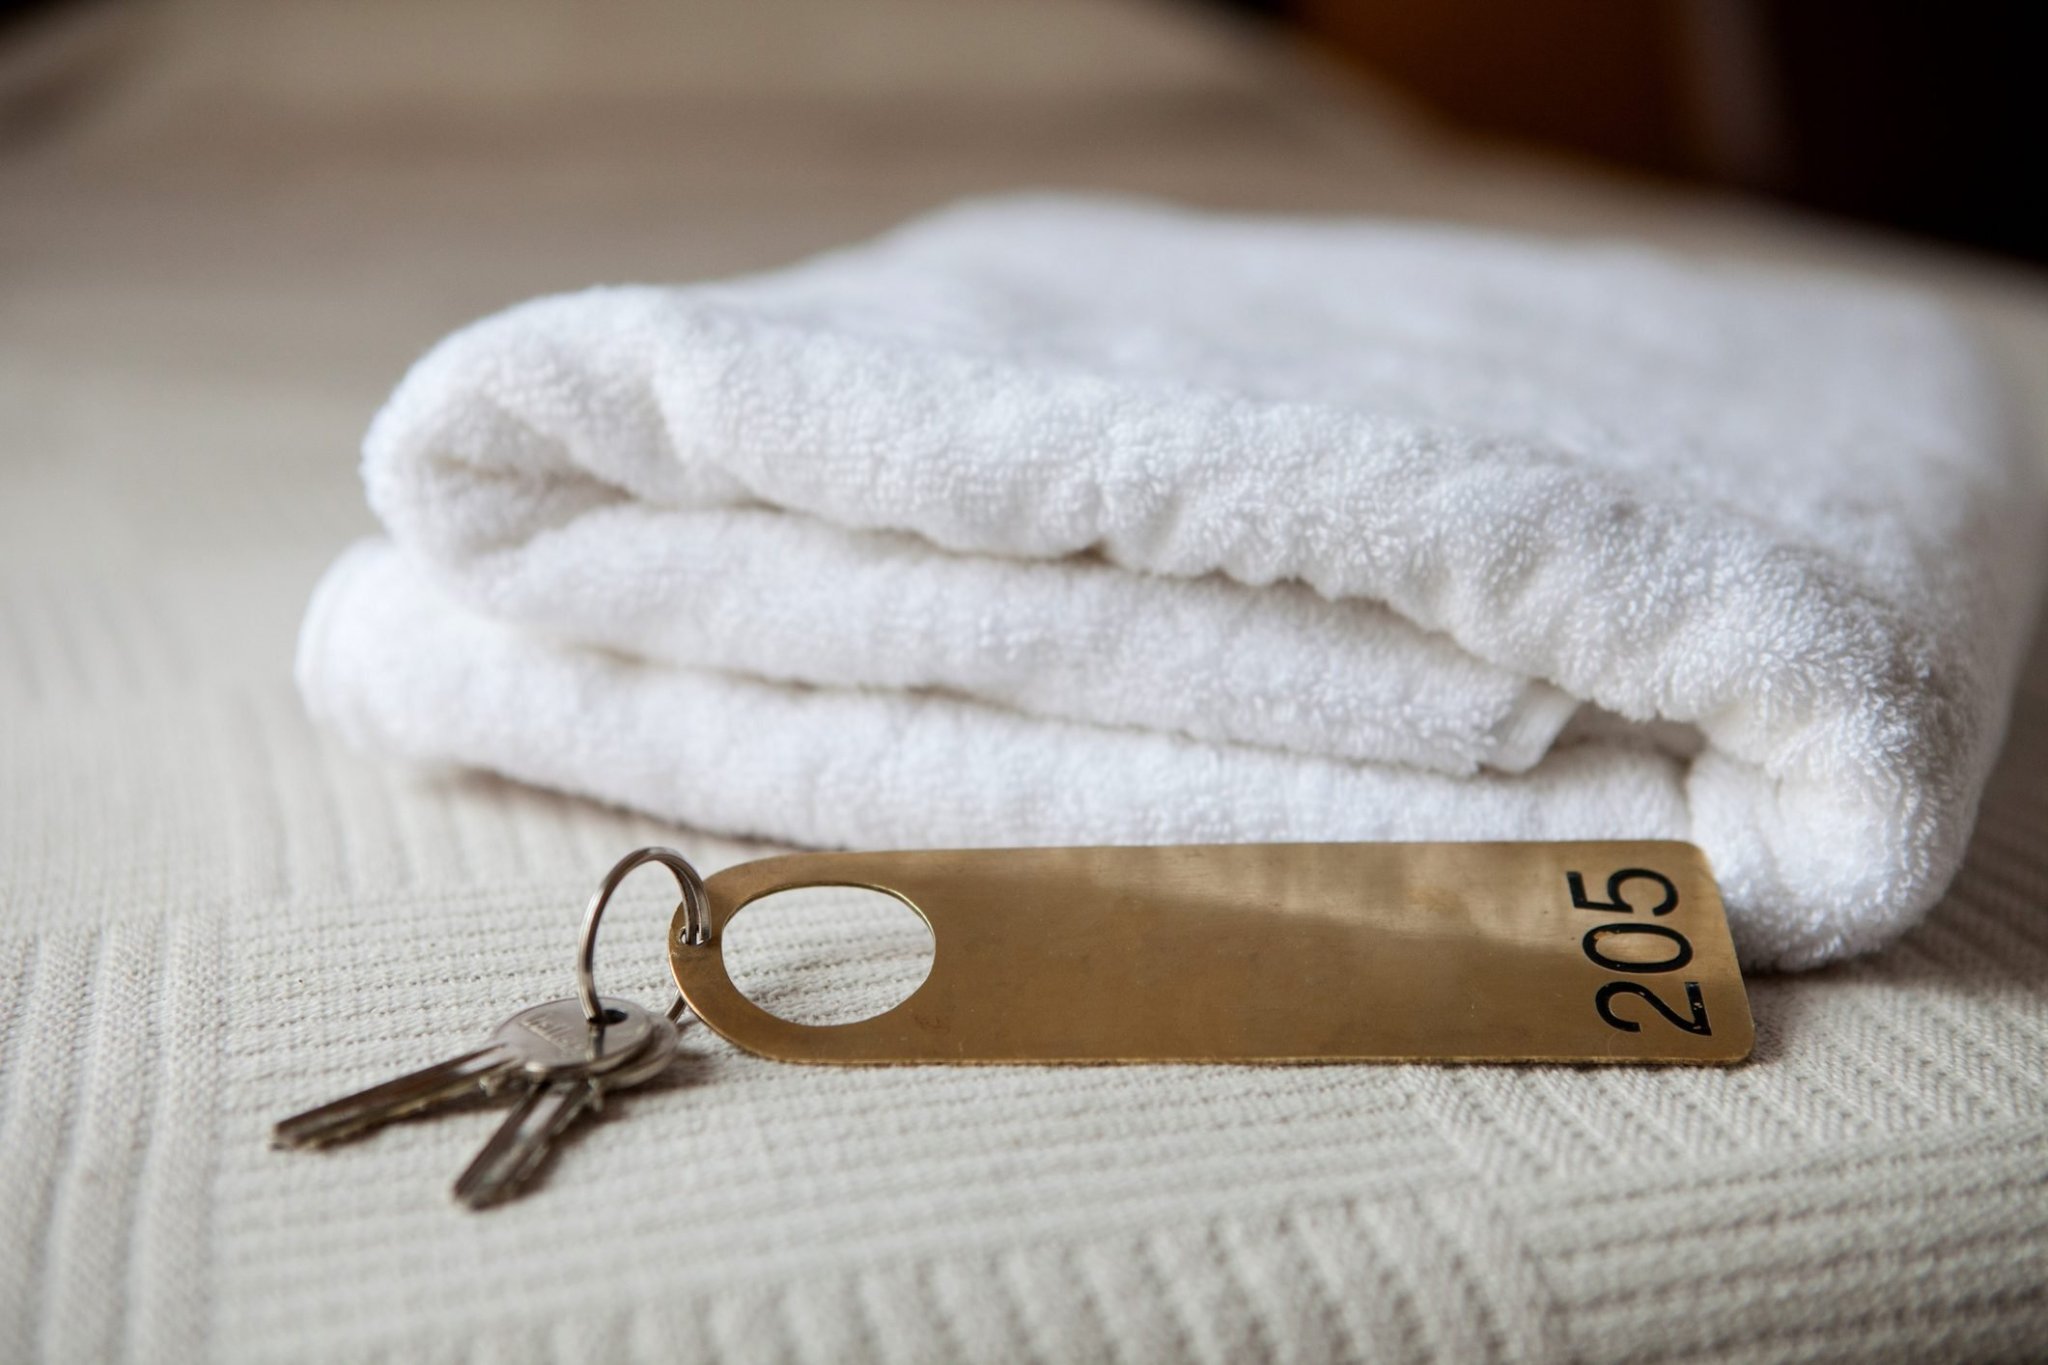 The Real Reason Why You Should Leave a Towel By Your Hotel Room Door